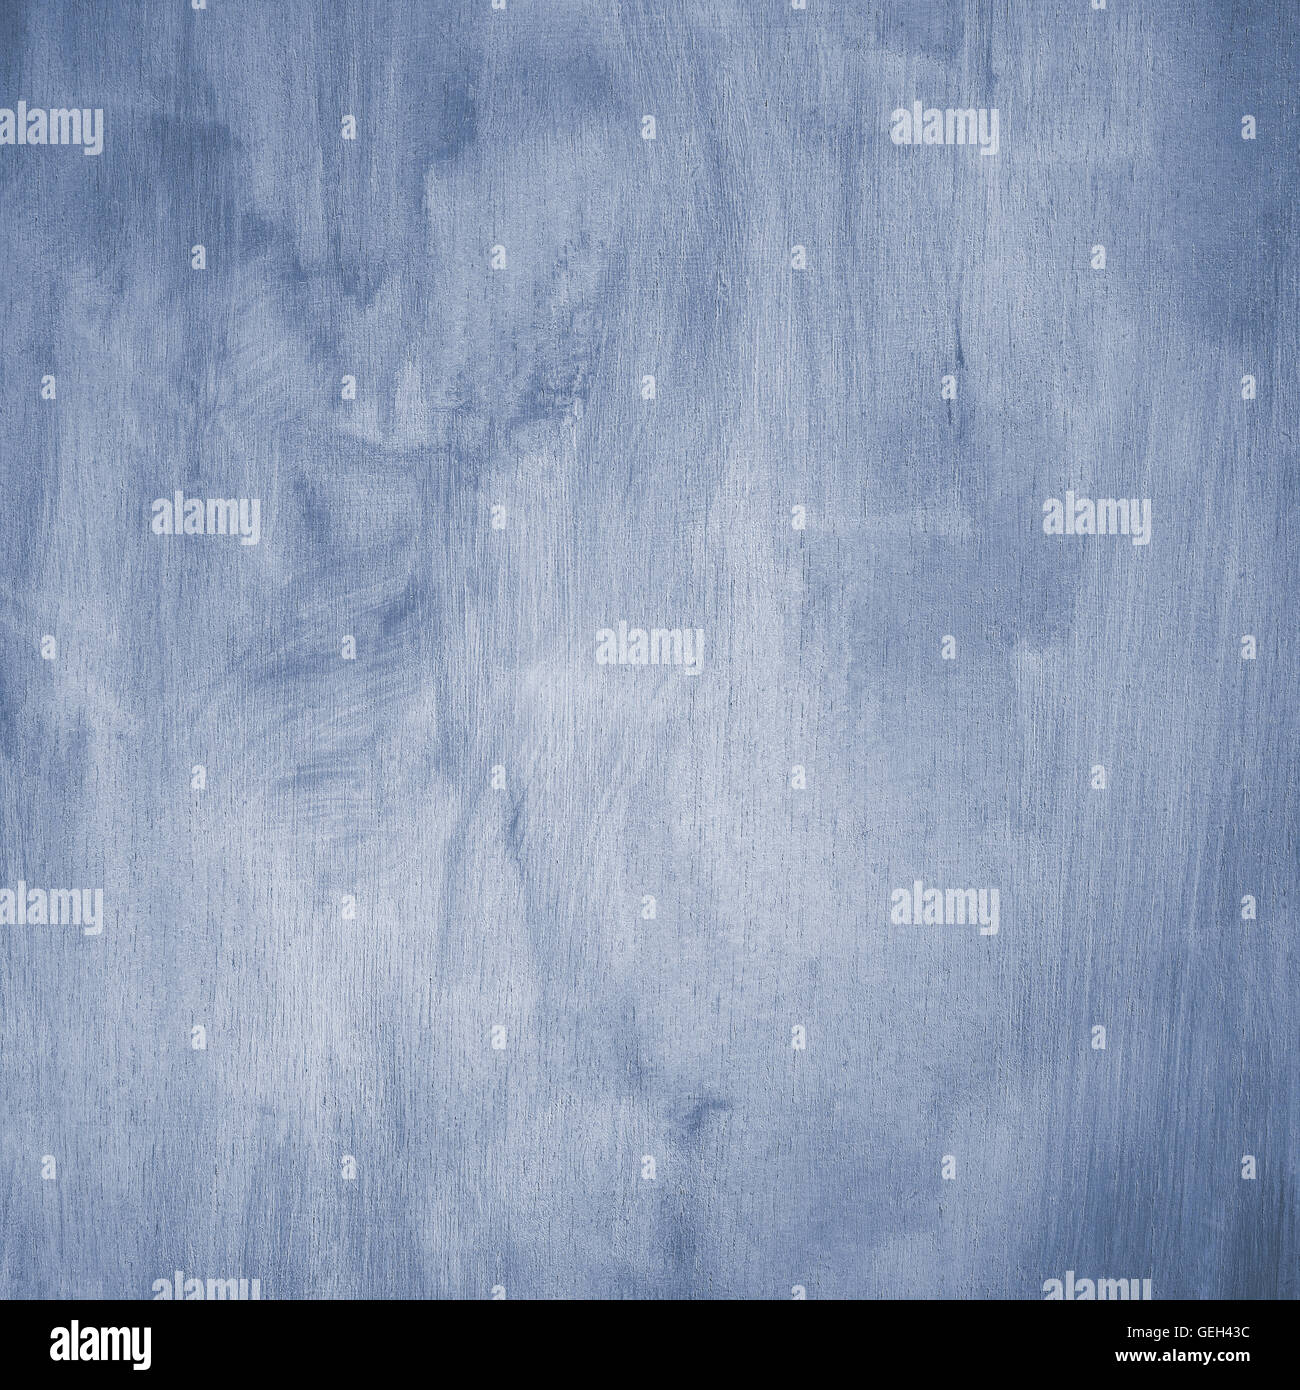 Texture painted wood in blue color Stock Photo